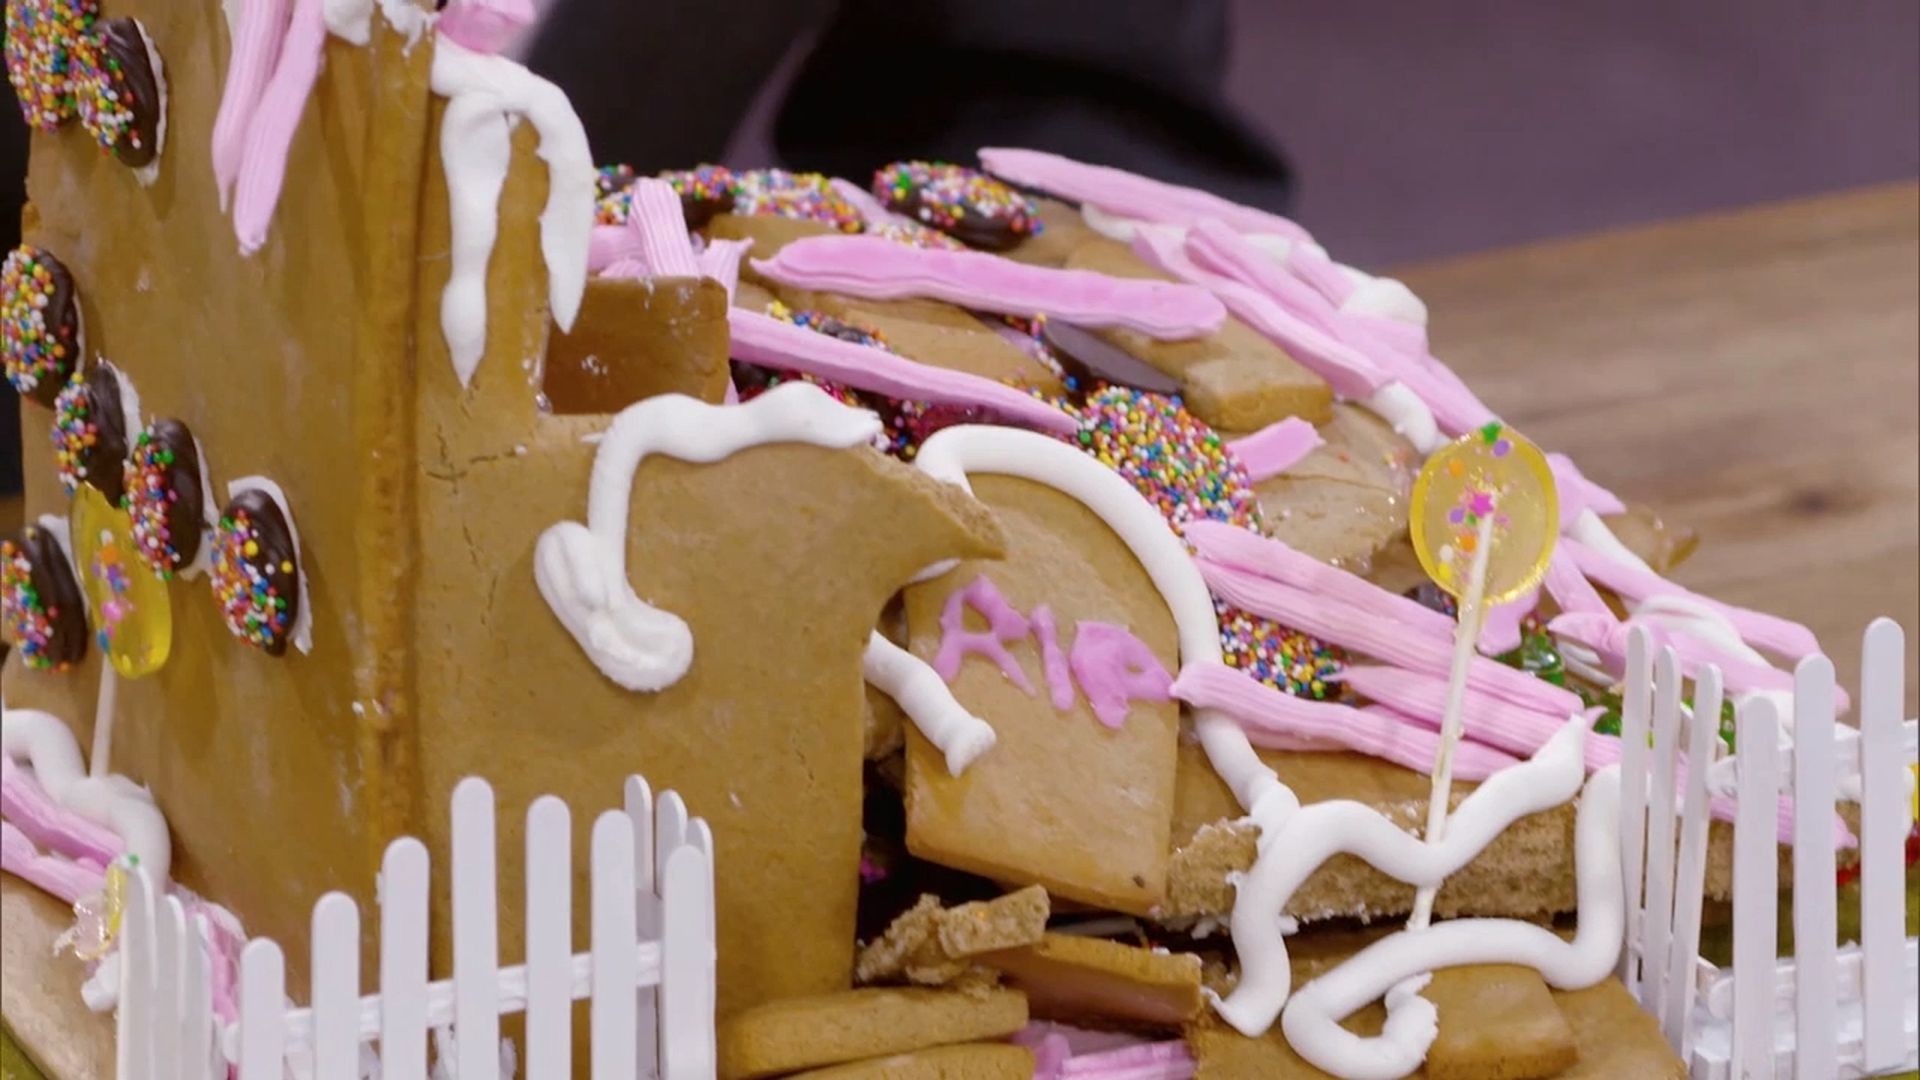 1920x1080 Epic gingerbread house fail leaves family on the brink of forfeit: Family  Food Fight Season 2, Short Video